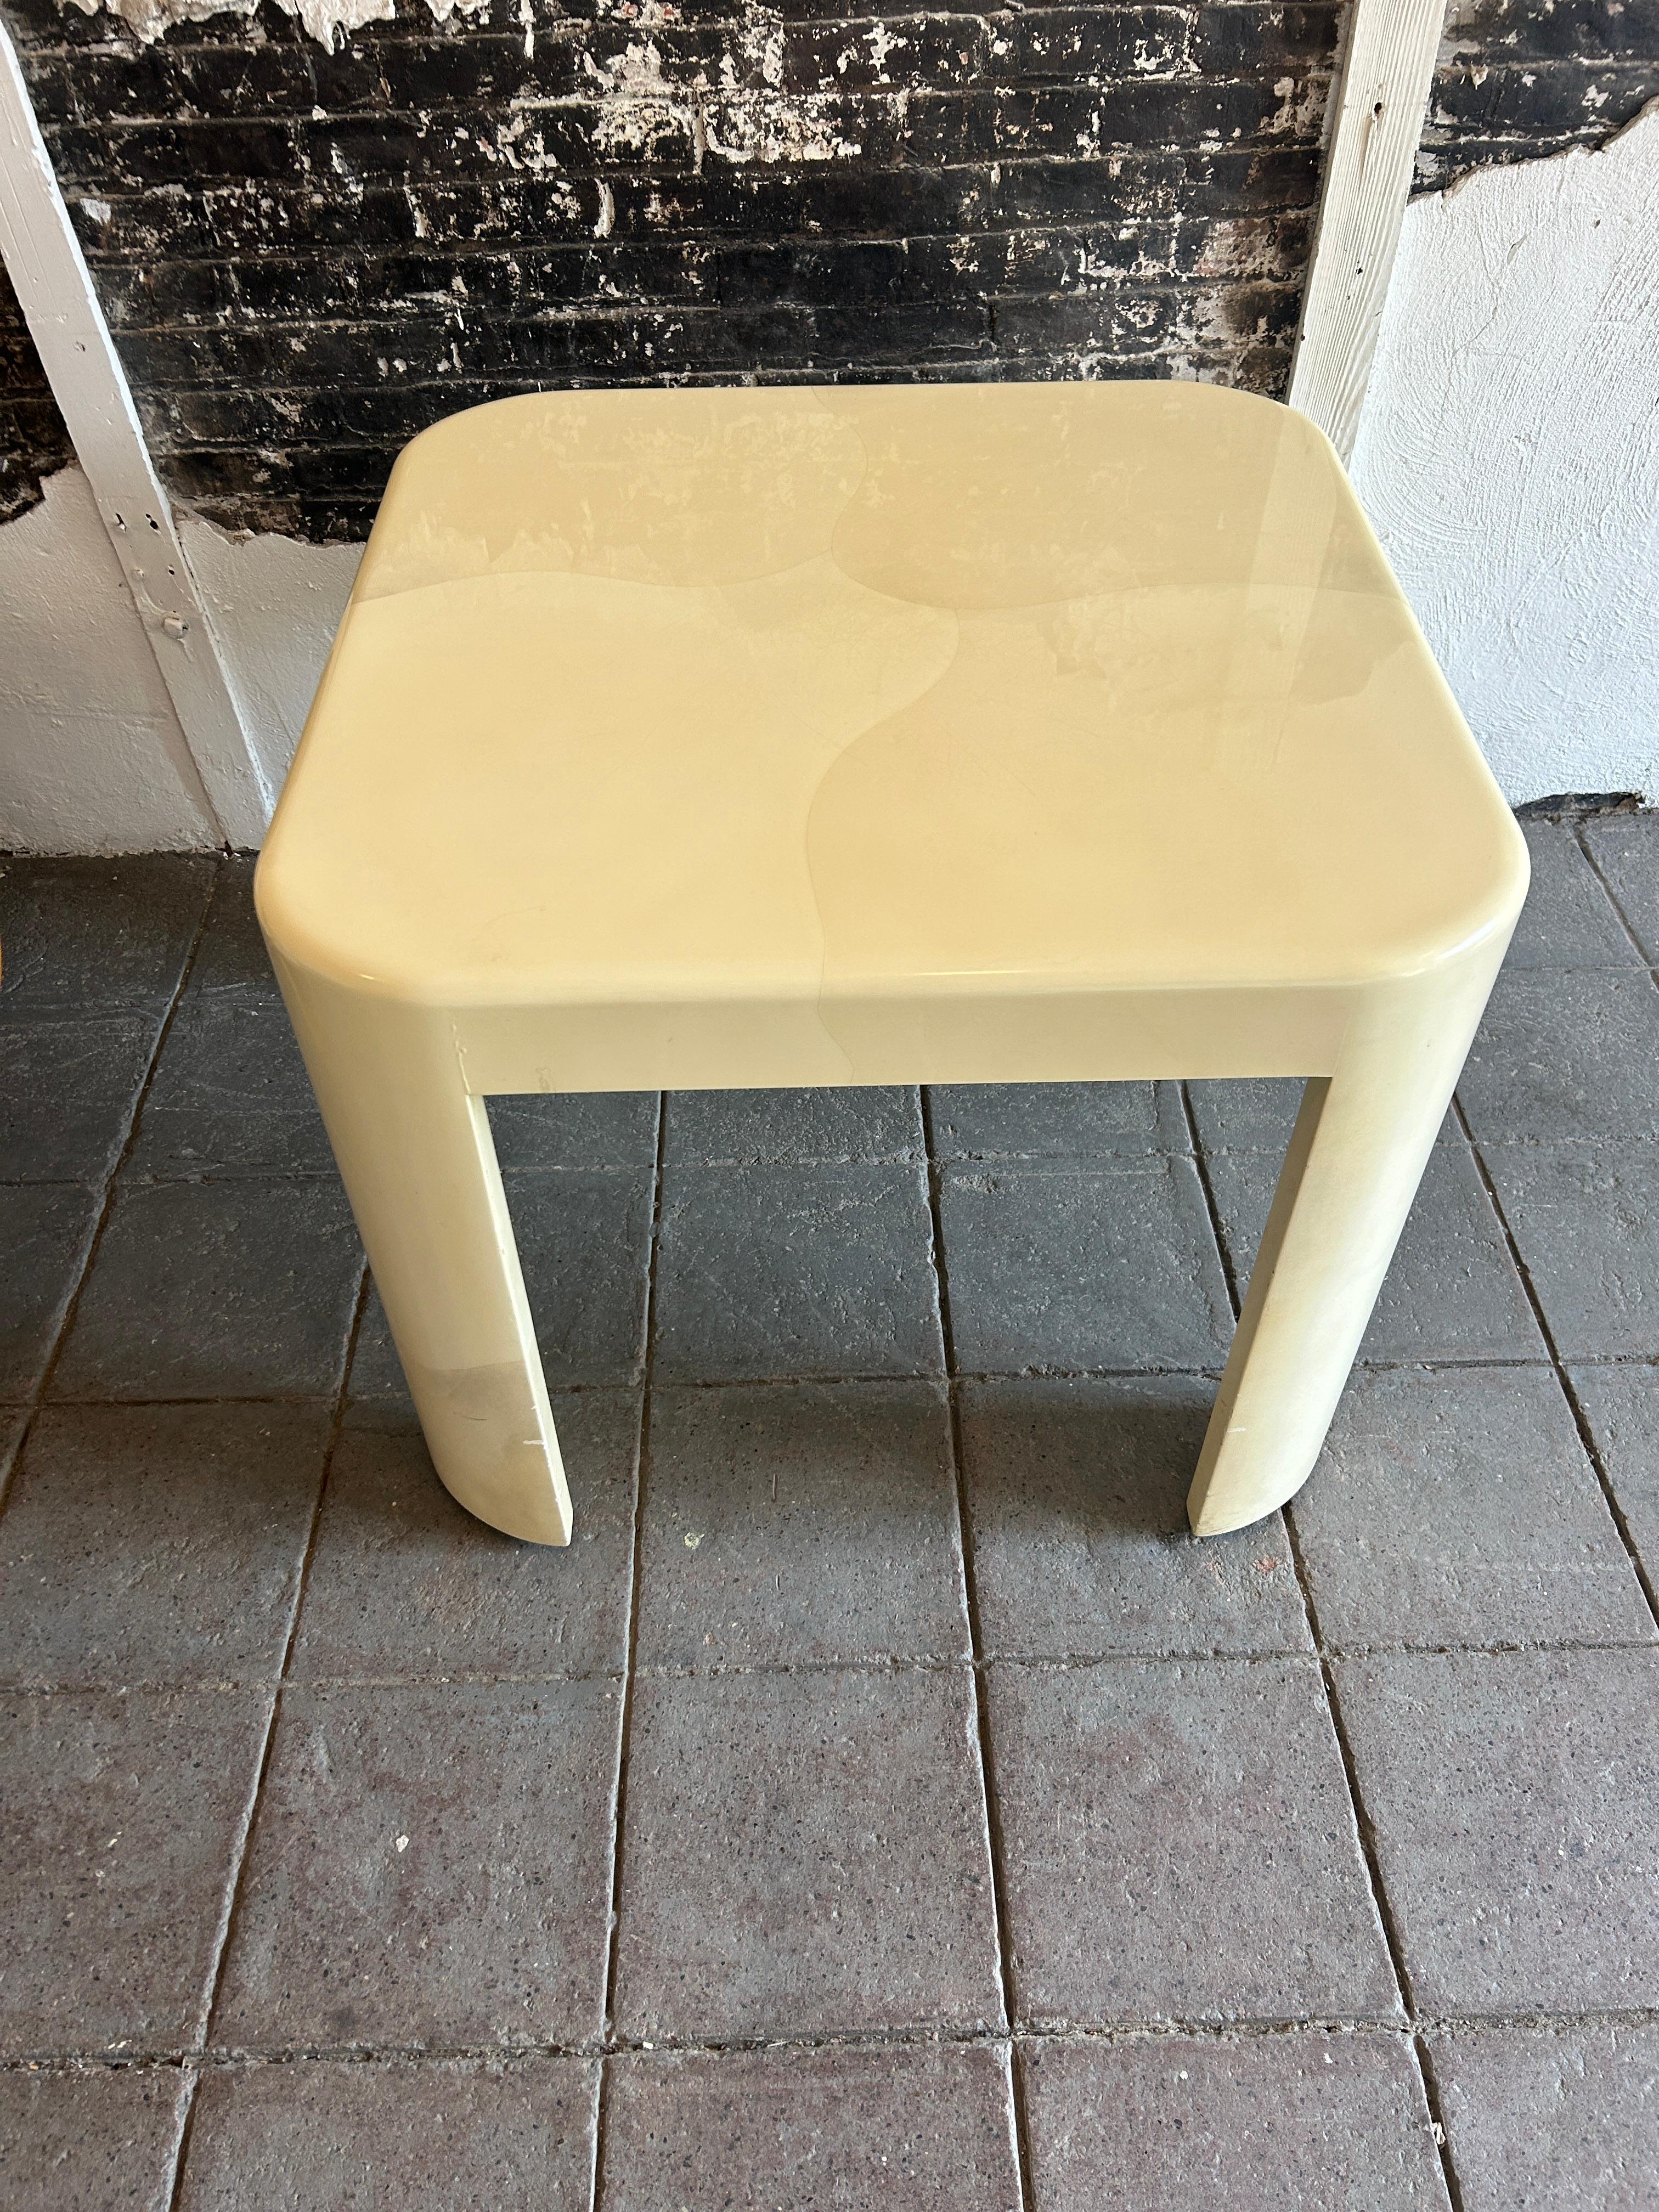 Rare Mid-Century Modern cream colored sculptural dining or game table with half cylindrical rounded legs and thick lacquered top with Tri color circular pattern design on top surfaces by Karl Springer. C. 1980. High gloss finish light wear to top